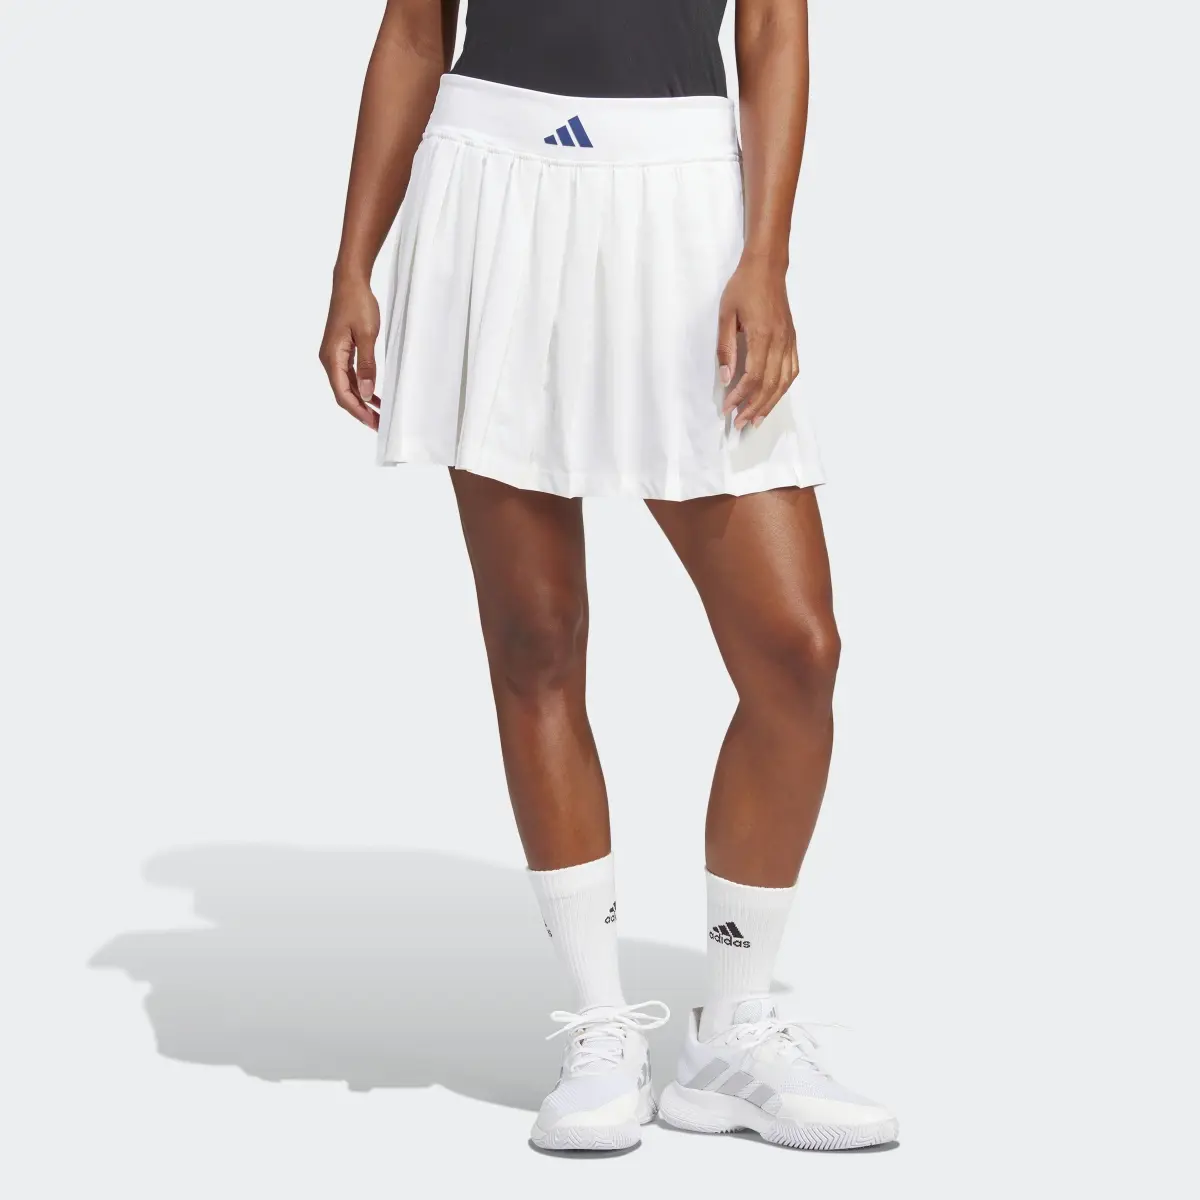 Adidas Clubhouse Premium Classic Tennis Pleated Skirt. 1